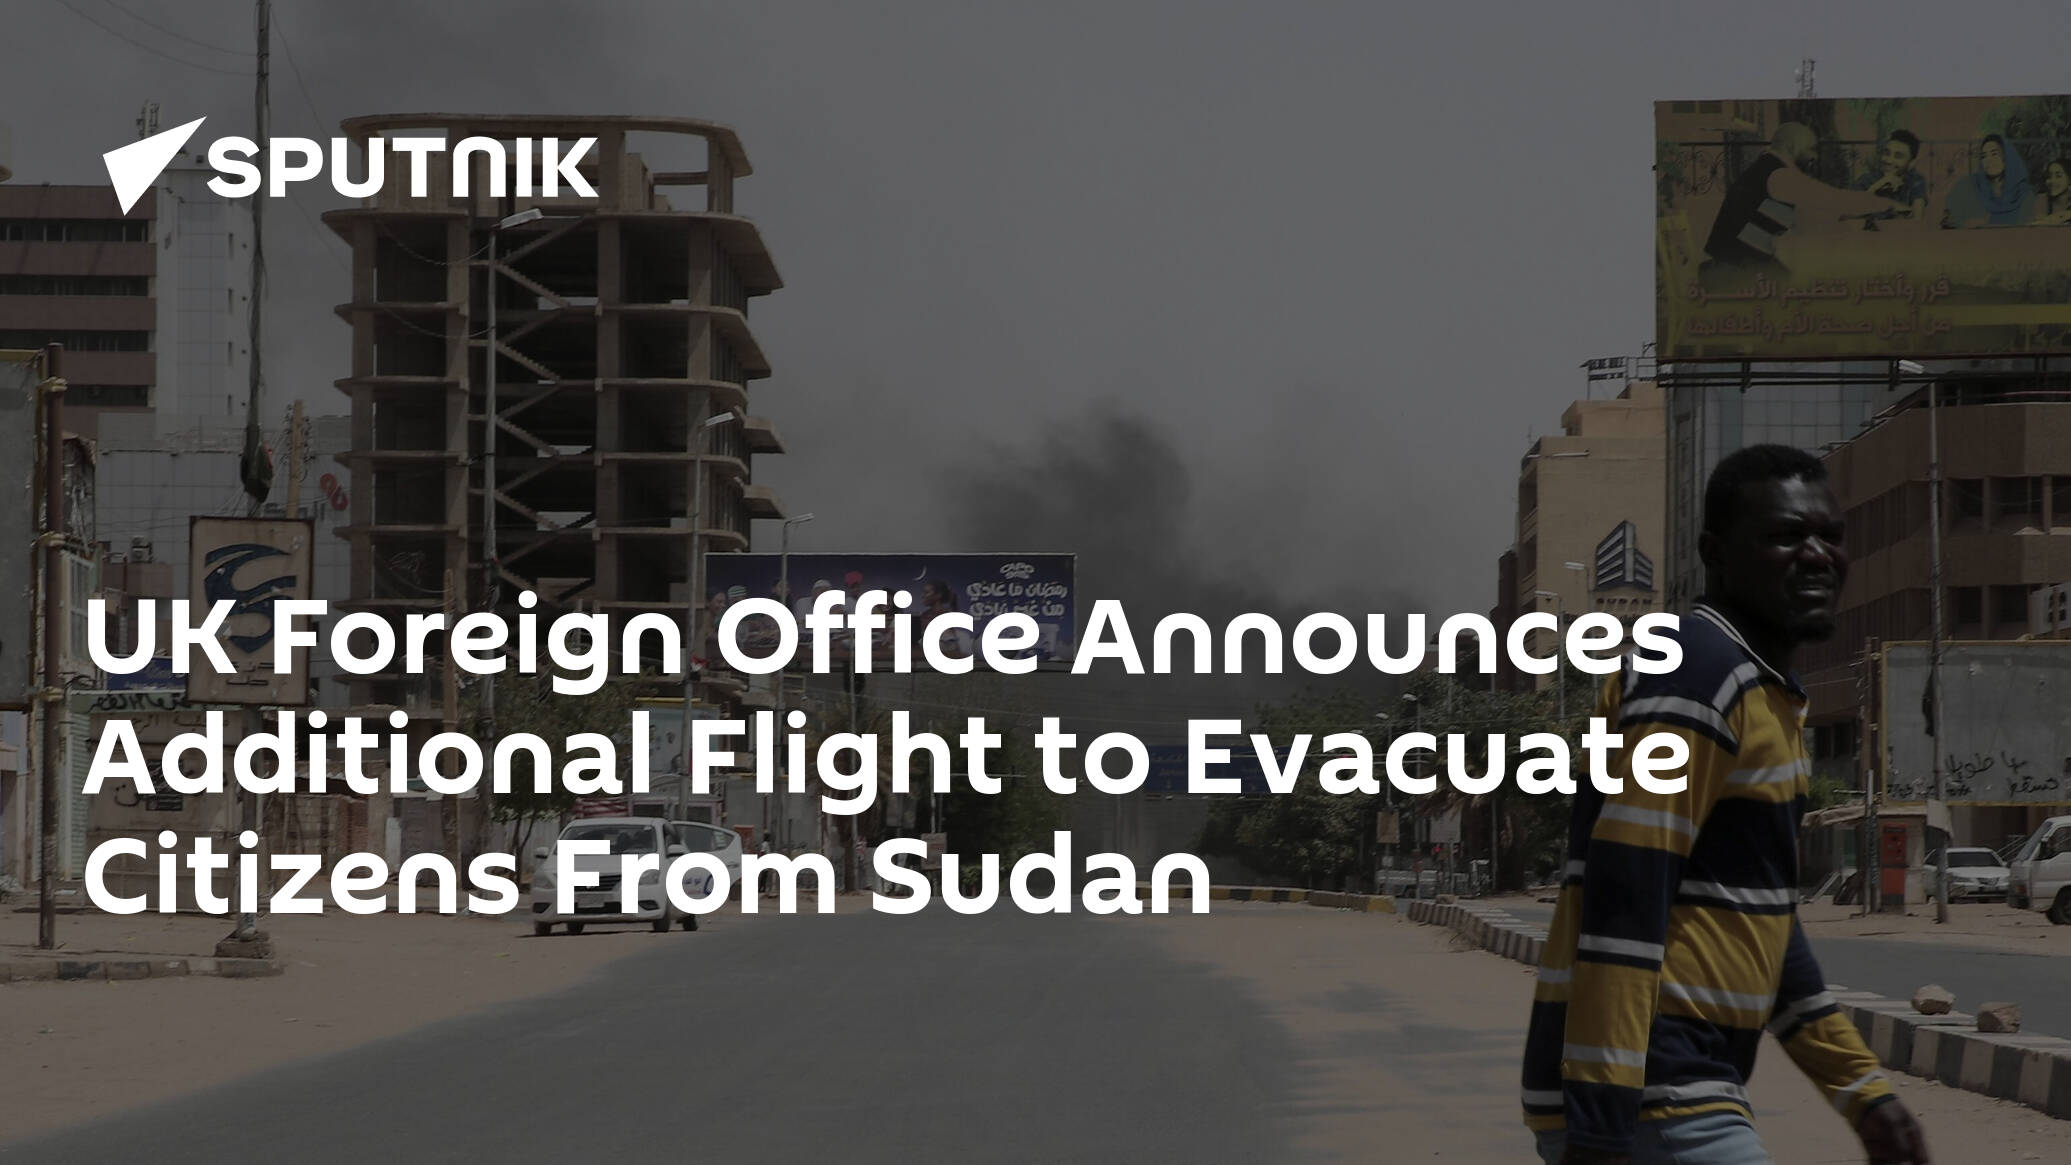 UK Foreign Office Announces Additional Flight to Evacuate Citizens From Sudan